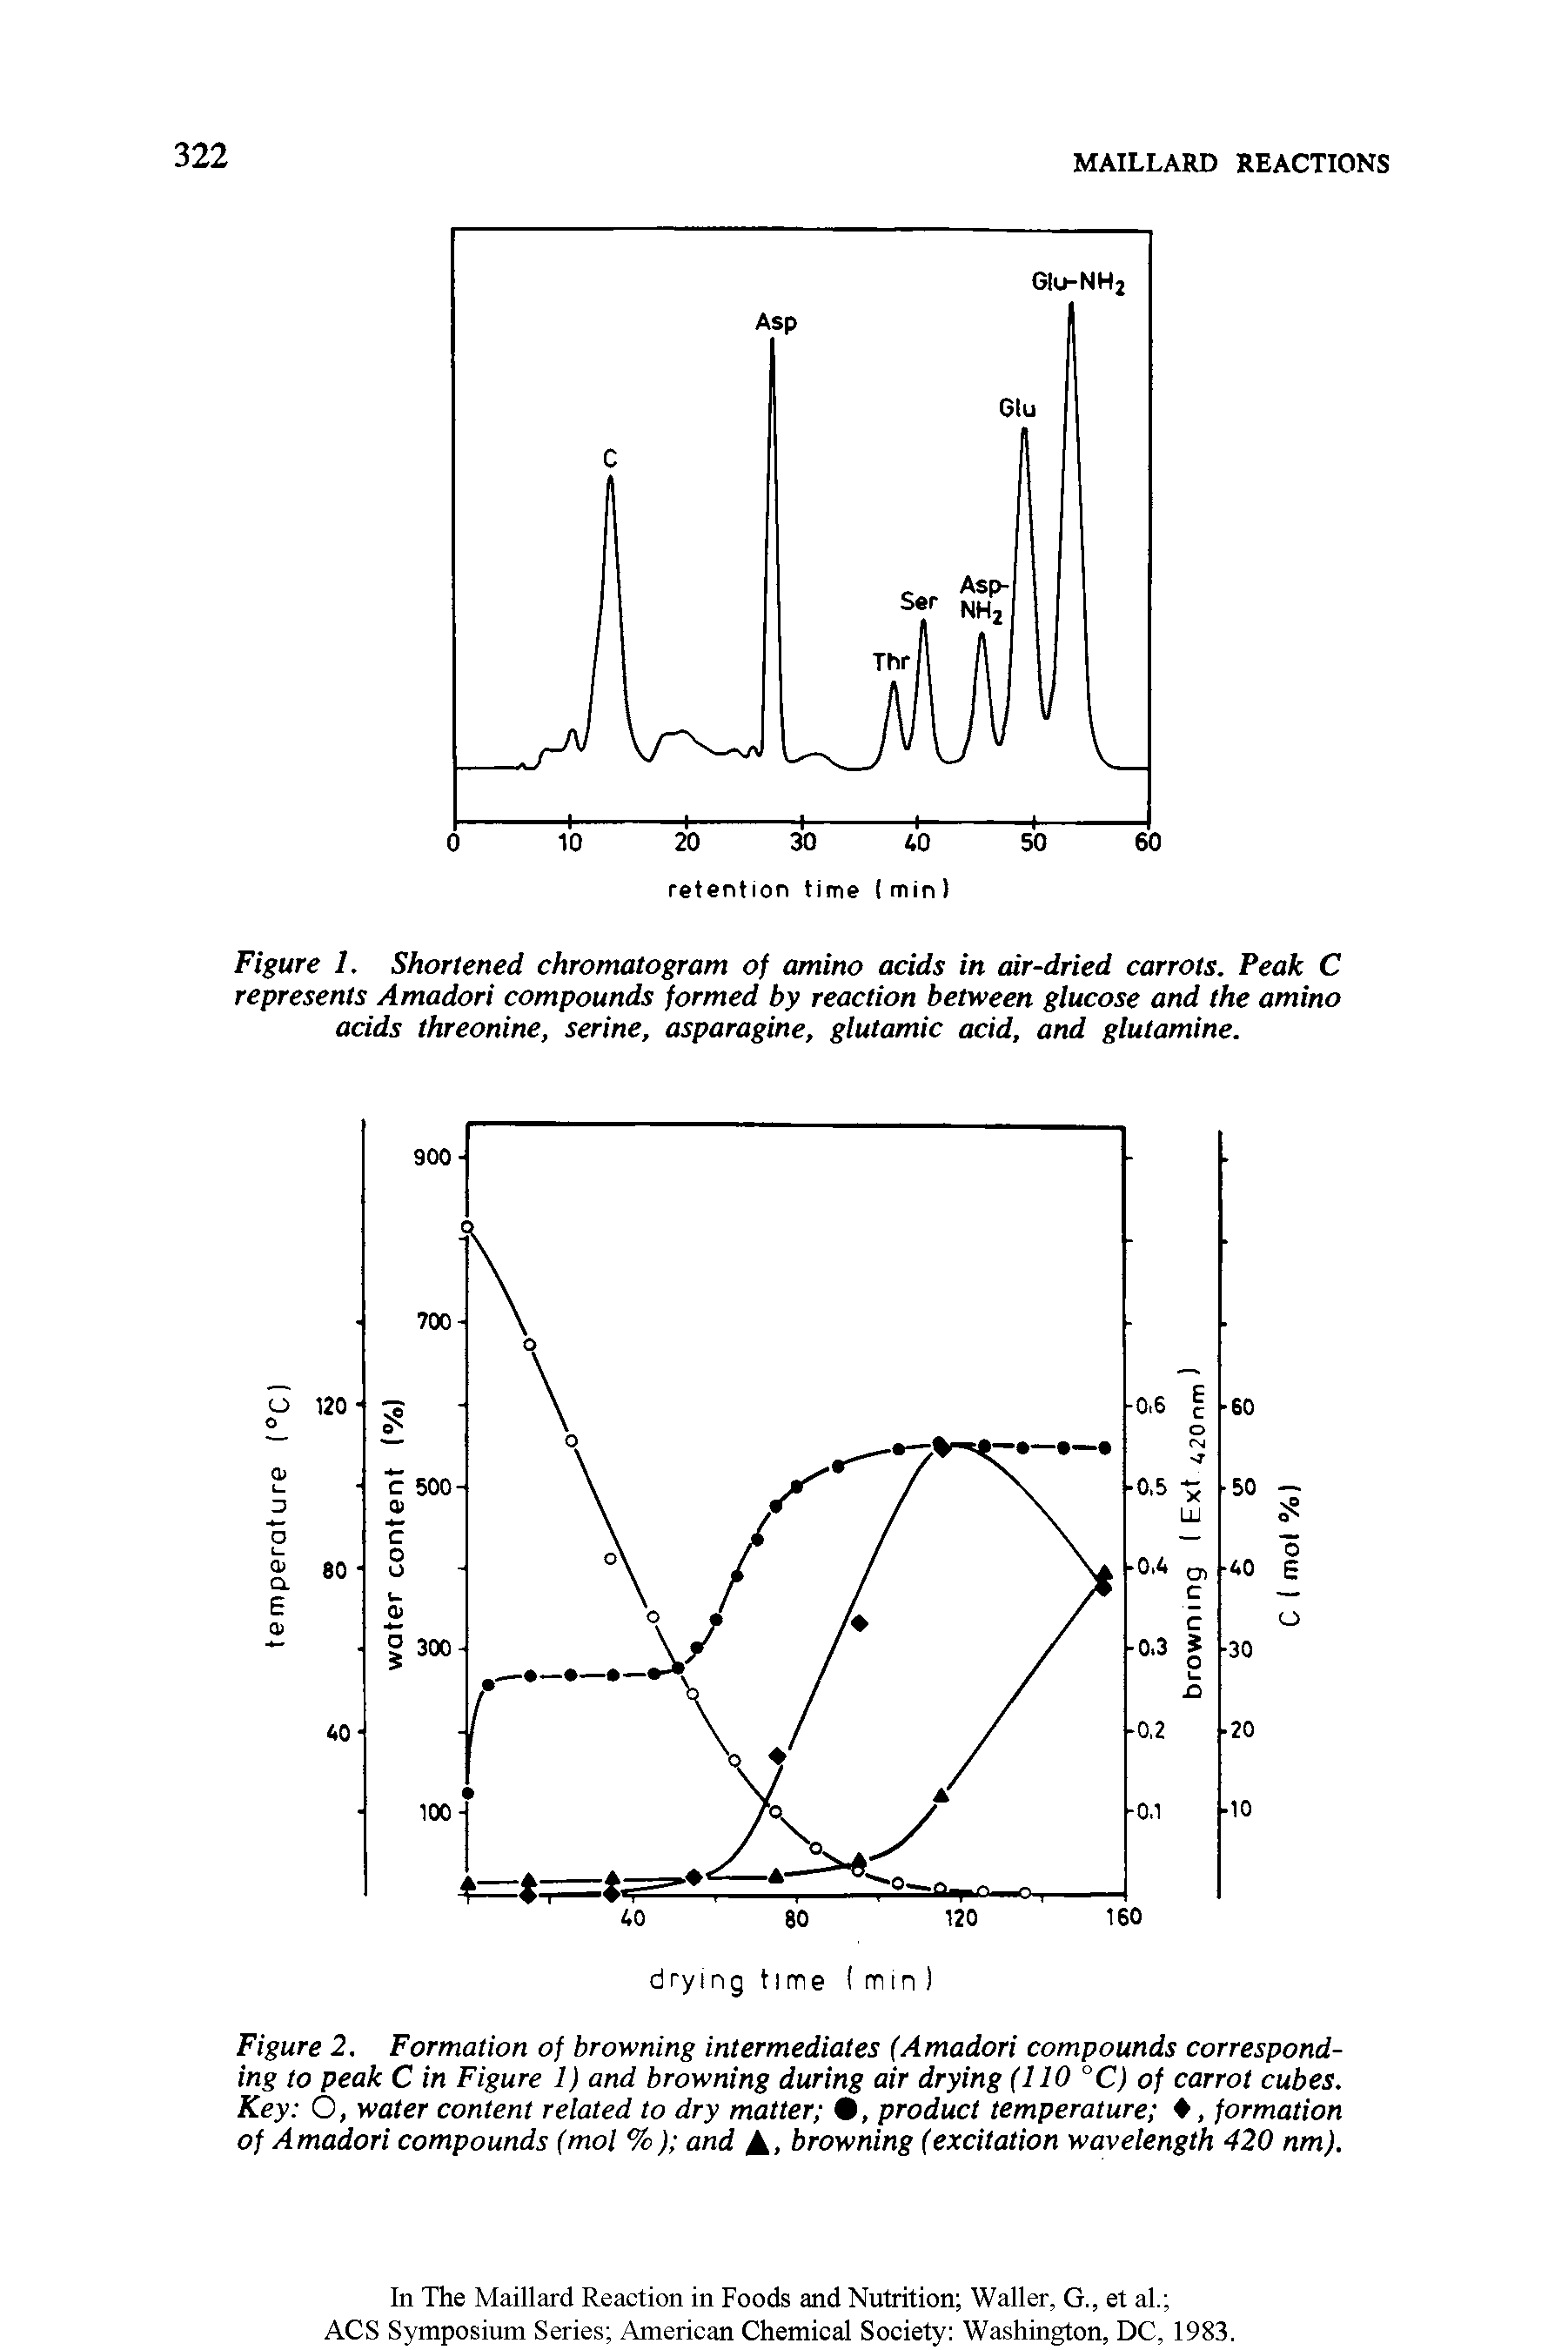 Figure 2. Formation of browning intermediates (Amadori compounds corresponding to peak C in Figure 1) and browning during air drying (110 "C) of carrot cubes. Key O, water content related to dry matter 0, product temperature , formation of Amadori compounds (mol %) and A, browning (excitation wavelength 420 nm).